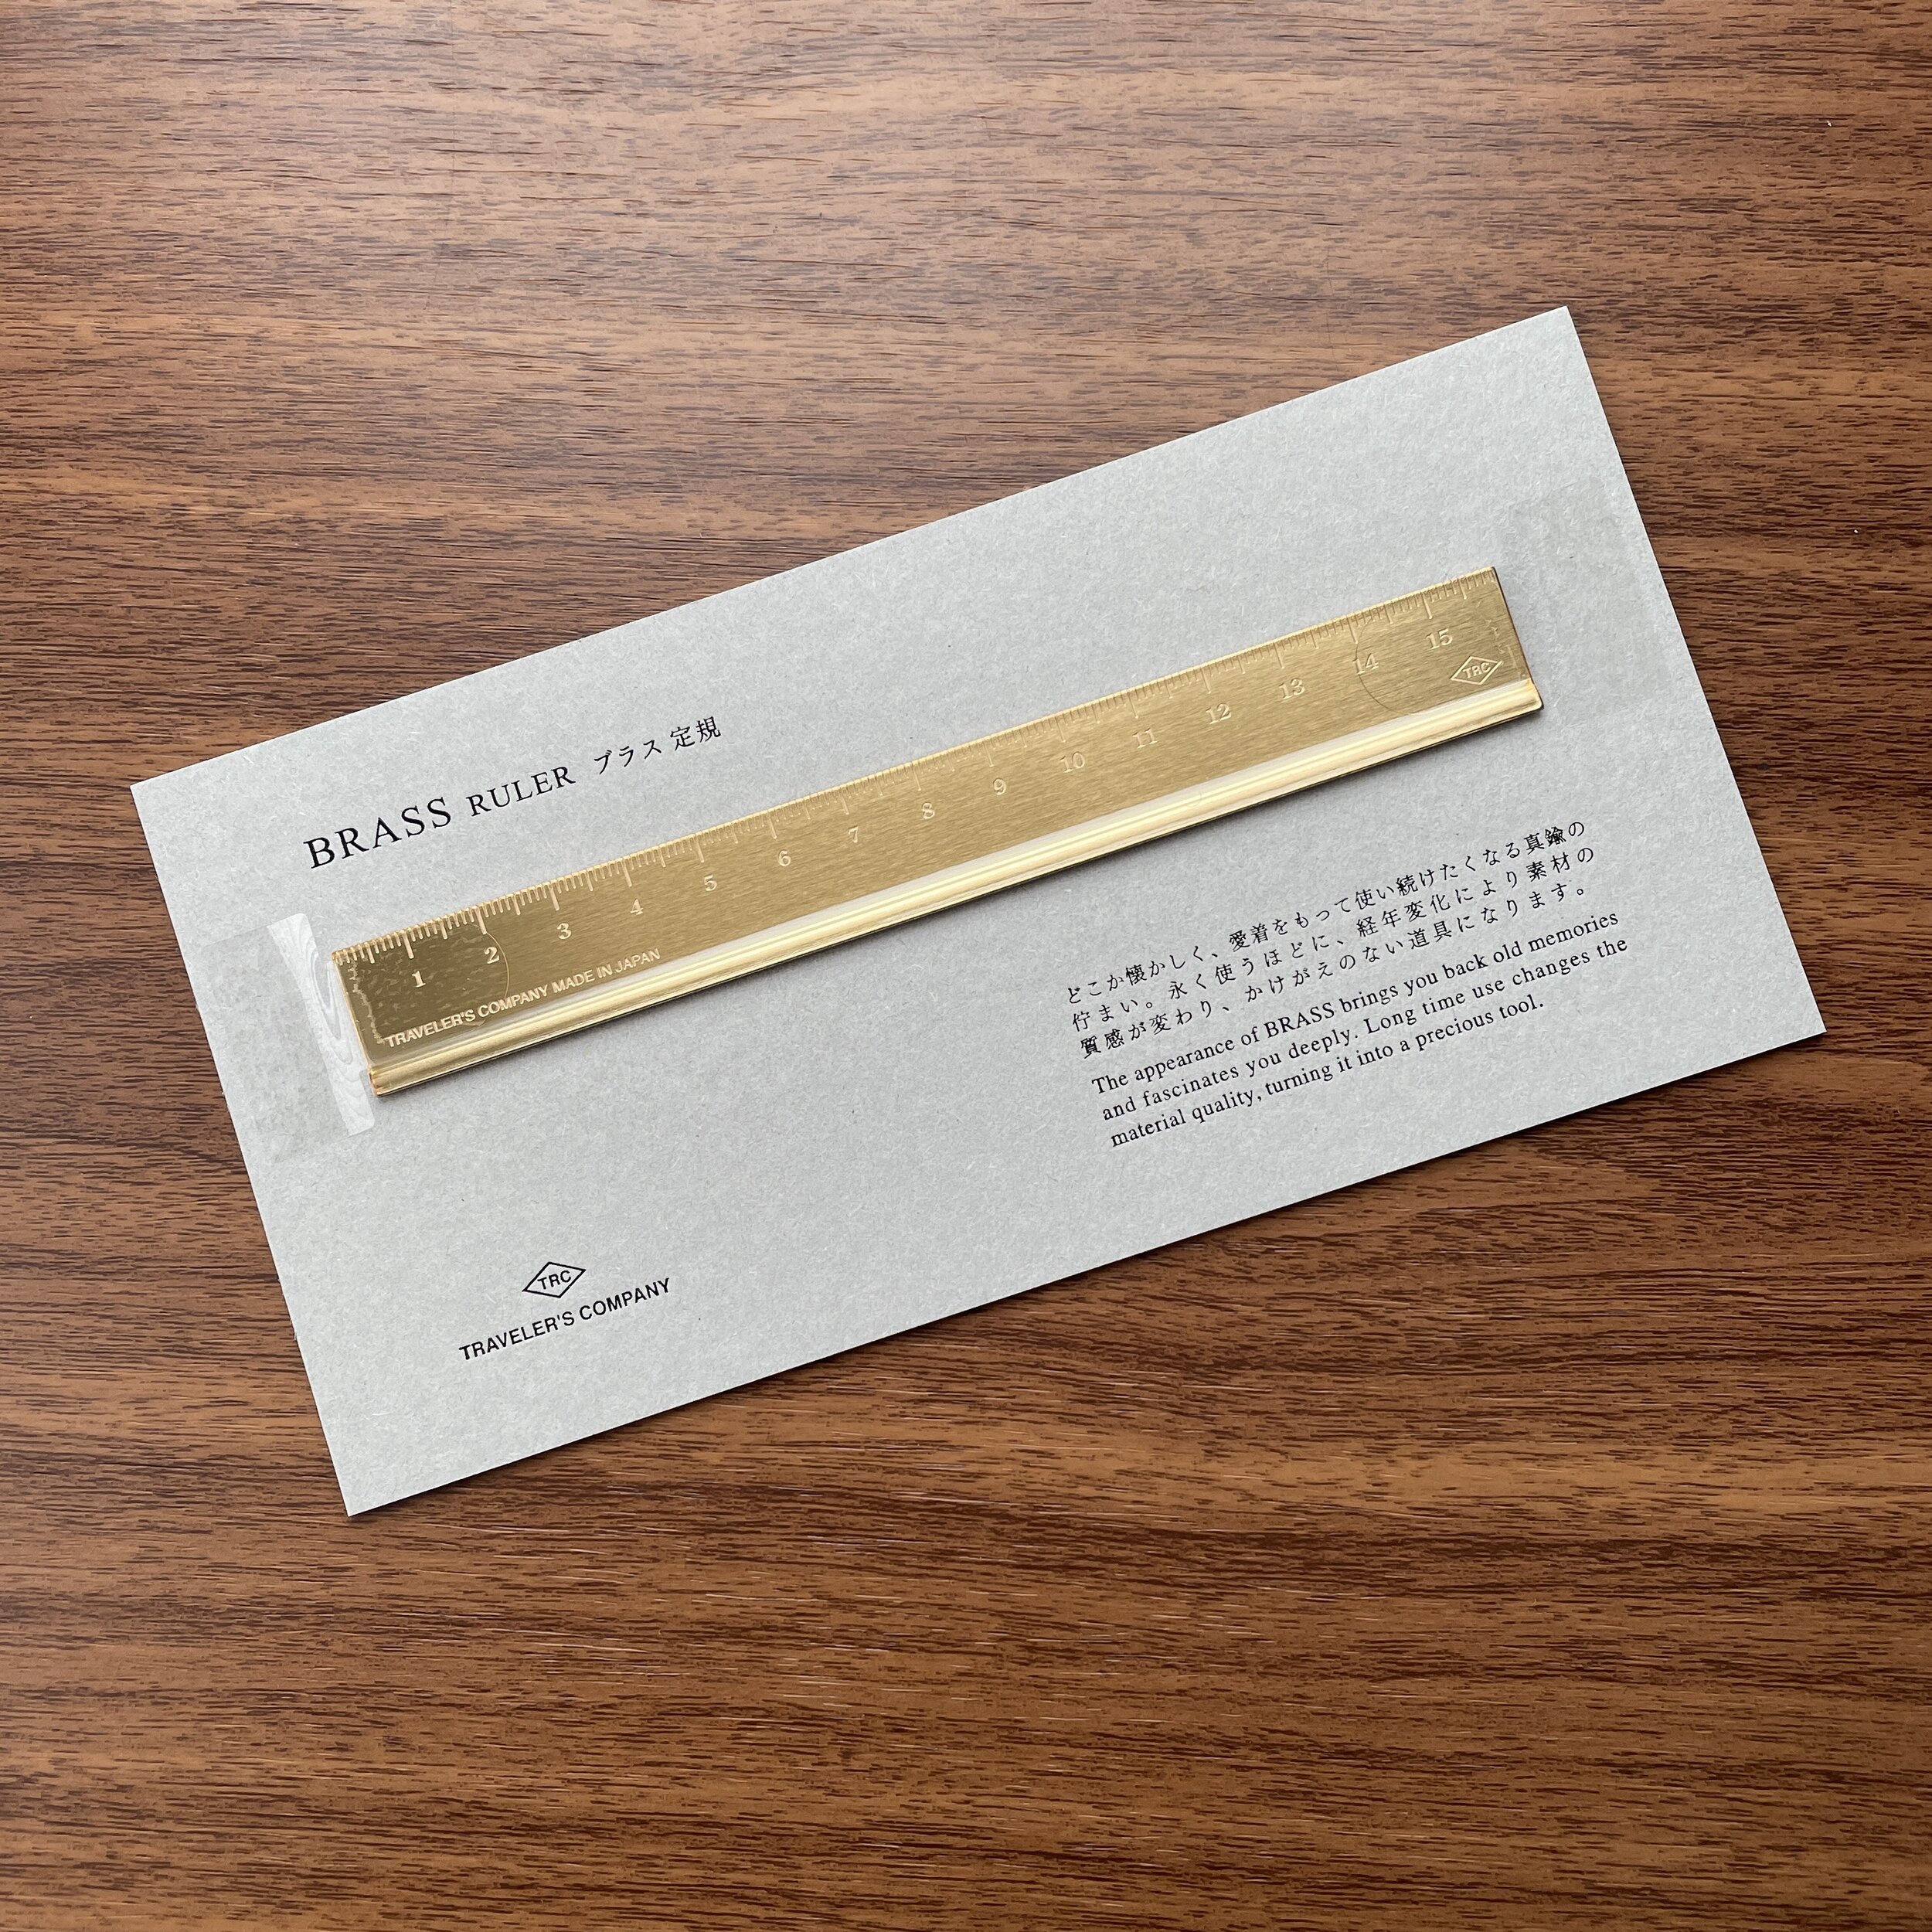 Details about   Outdoor Brass Ruler Bookmark Double Scale Cm&Inch Digital For Traveler Notebook 